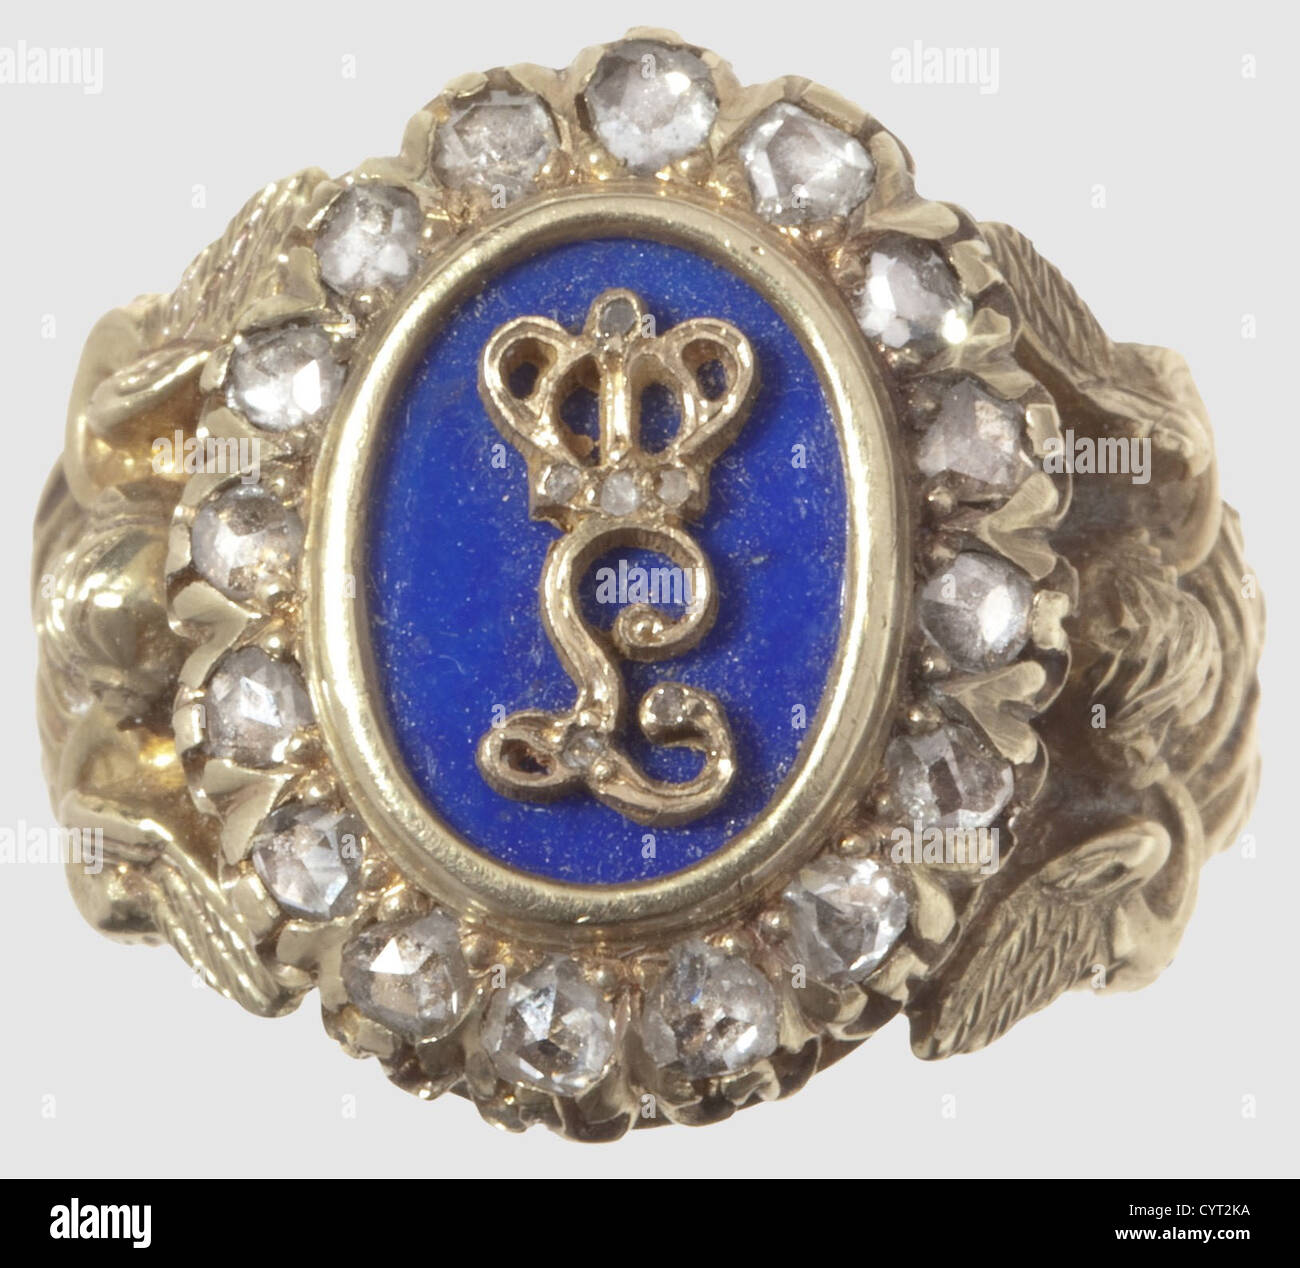 King Ludwig II of Bavaria(1845 - 1886),A presentation ring set with diamonds for the Duc de Montpensier in 1874 Gold,lapis lazuli and 22 diamond roses.The large edition for men.The inner medallion engraved with the coat of arms of the Dukes of Montpensier and the date '26 aout 1874'.13.06 g.A present from King Ludwig II to Antoine d'Orleans,Duc de Montpensier(1824 - 1890)on occasion of his second journey to Paris from 21 - 28 August 1874.The duke was the fifth son of Louis Philippe and married the Spanish Infanta Maria Luisa Ferdinanda(1832 - 1897),Additional-Rights-Clearences-Not Available Stock Photo